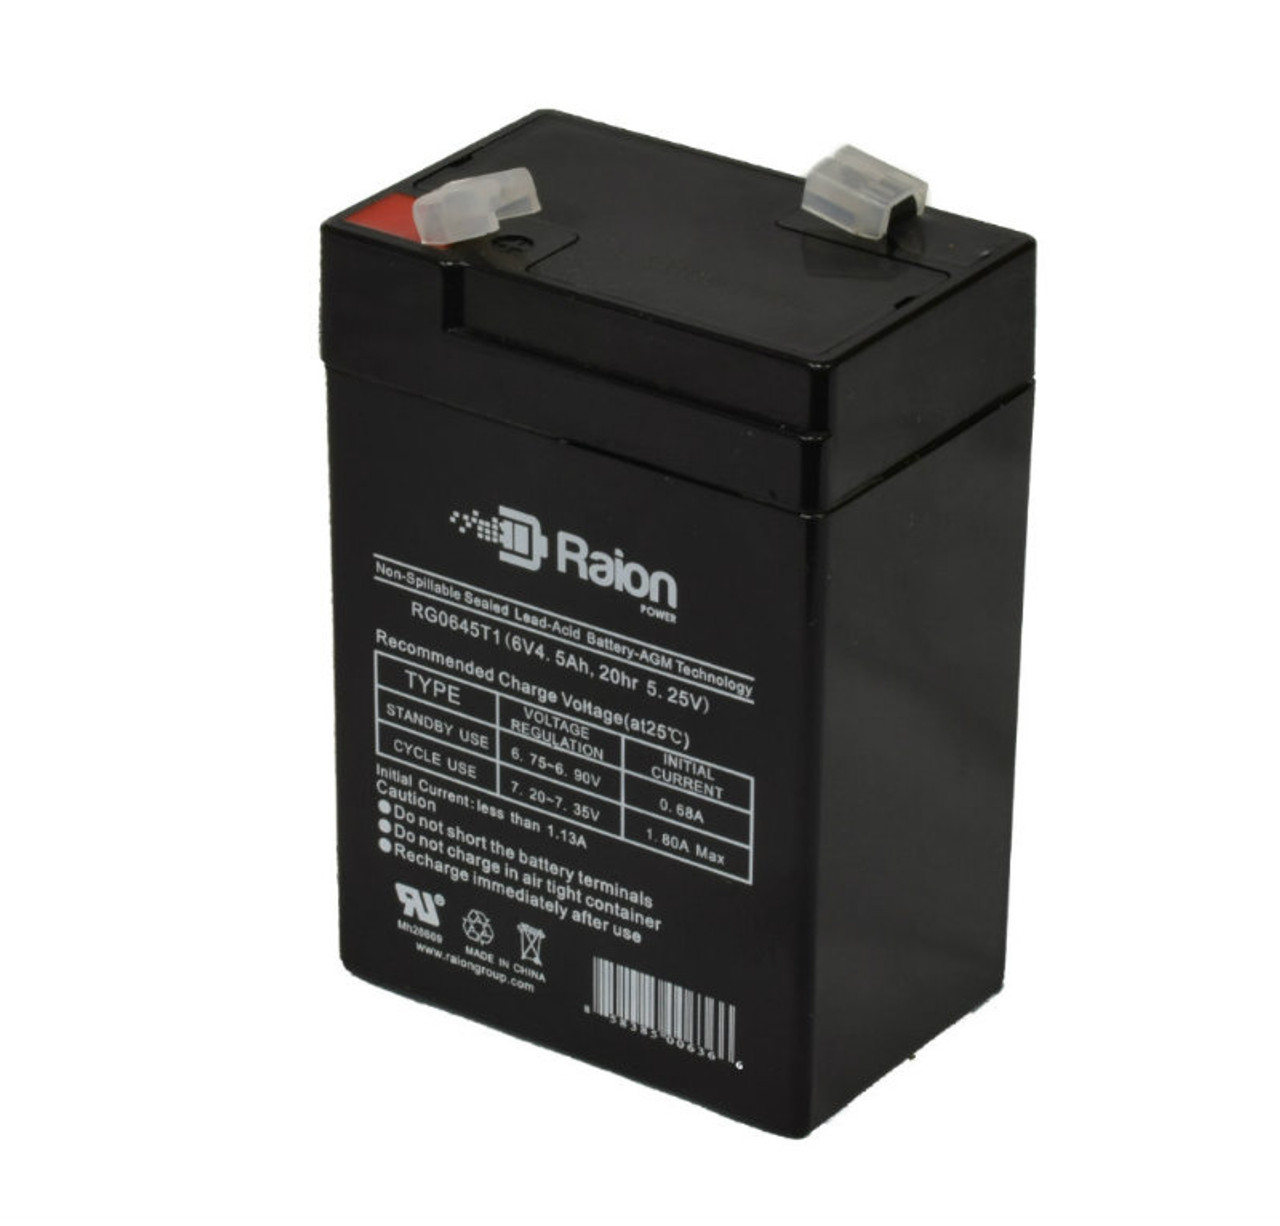 Raion Power RG0645T1 6V 4.5Ah Replacement Battery Cartridge for Ohio 504Us Pulse Oximeter